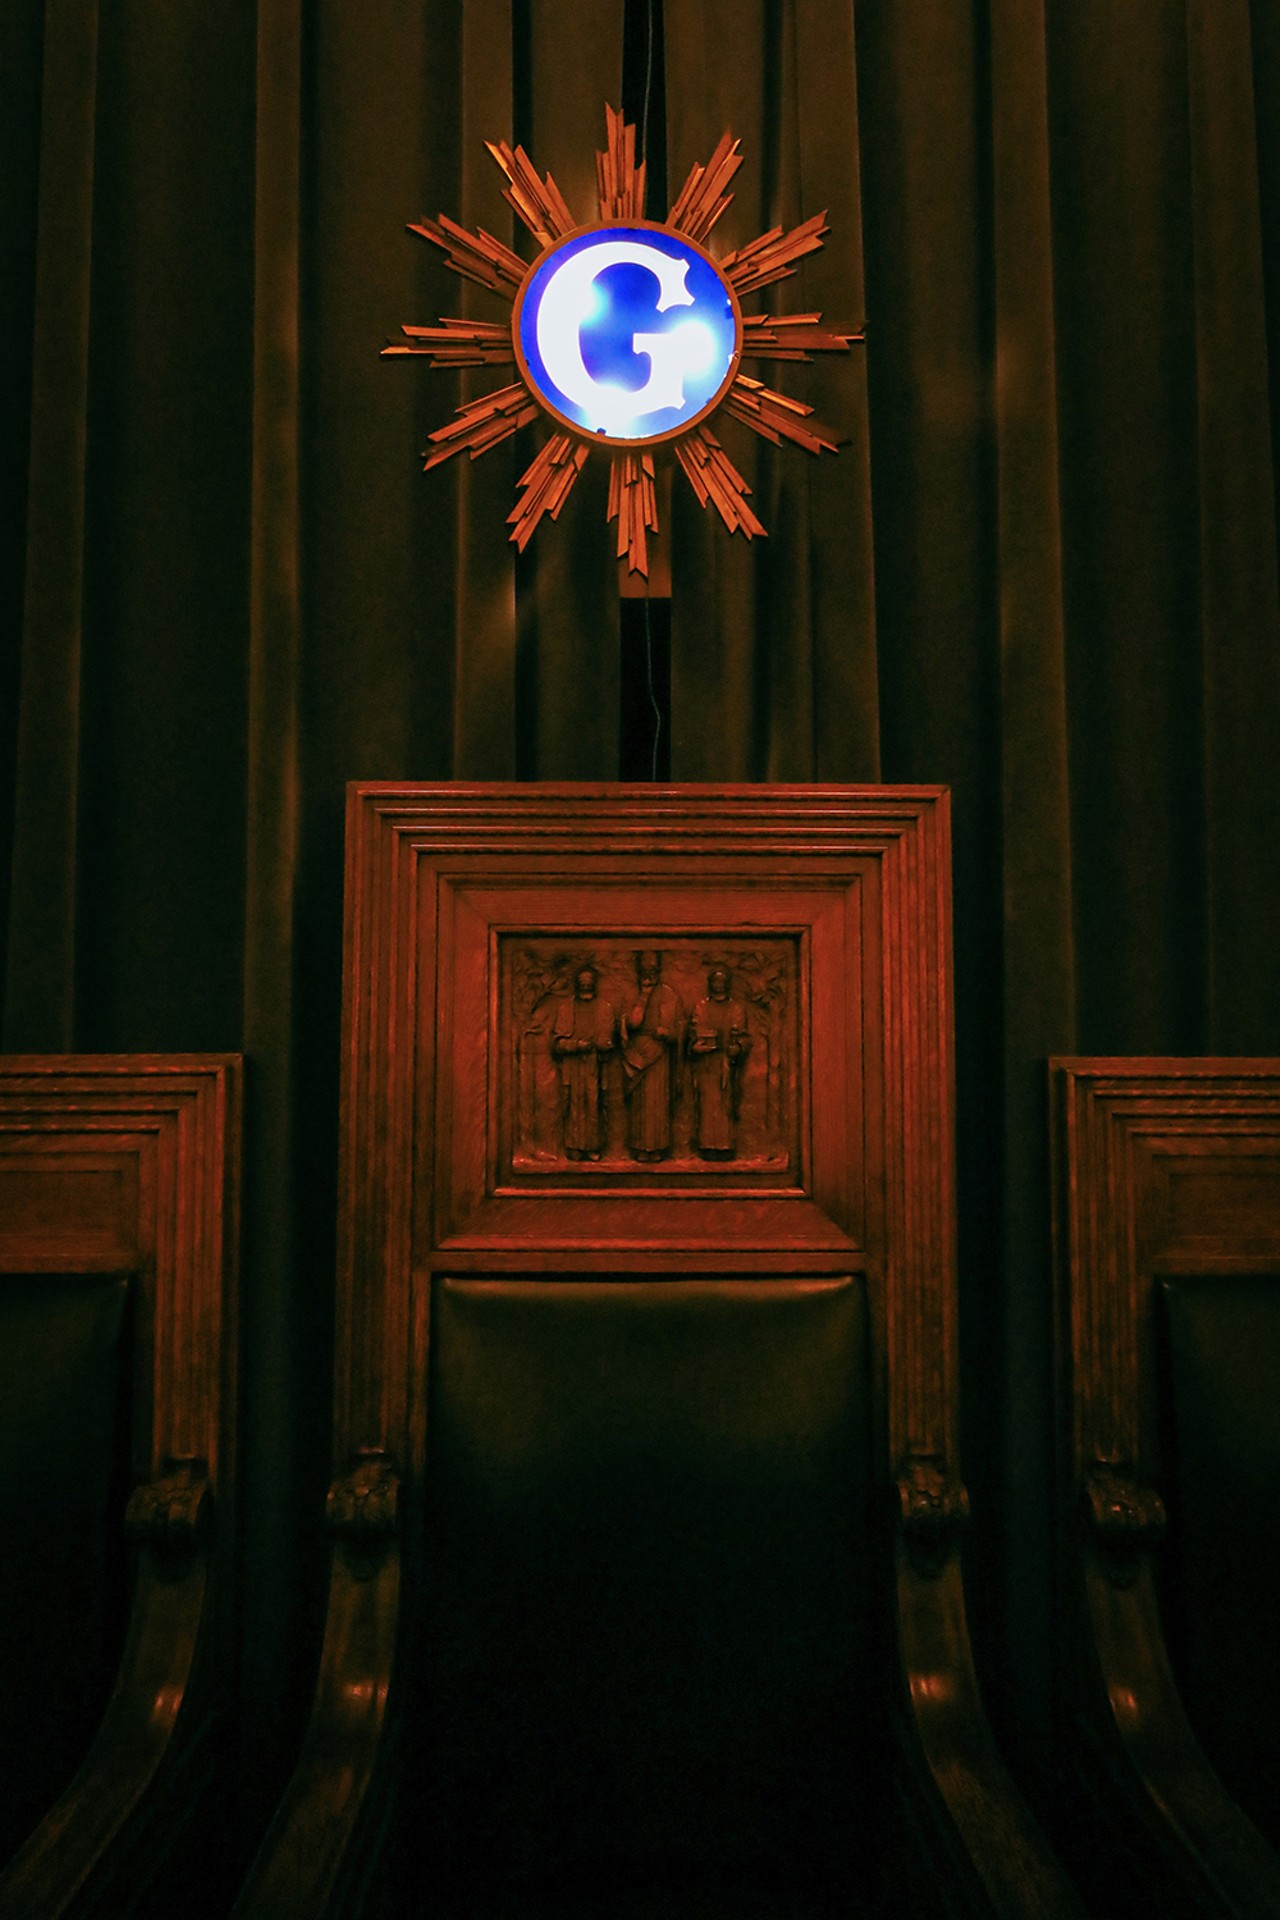 A tour inside Detroit’s Masonic Temple, the largest in the world